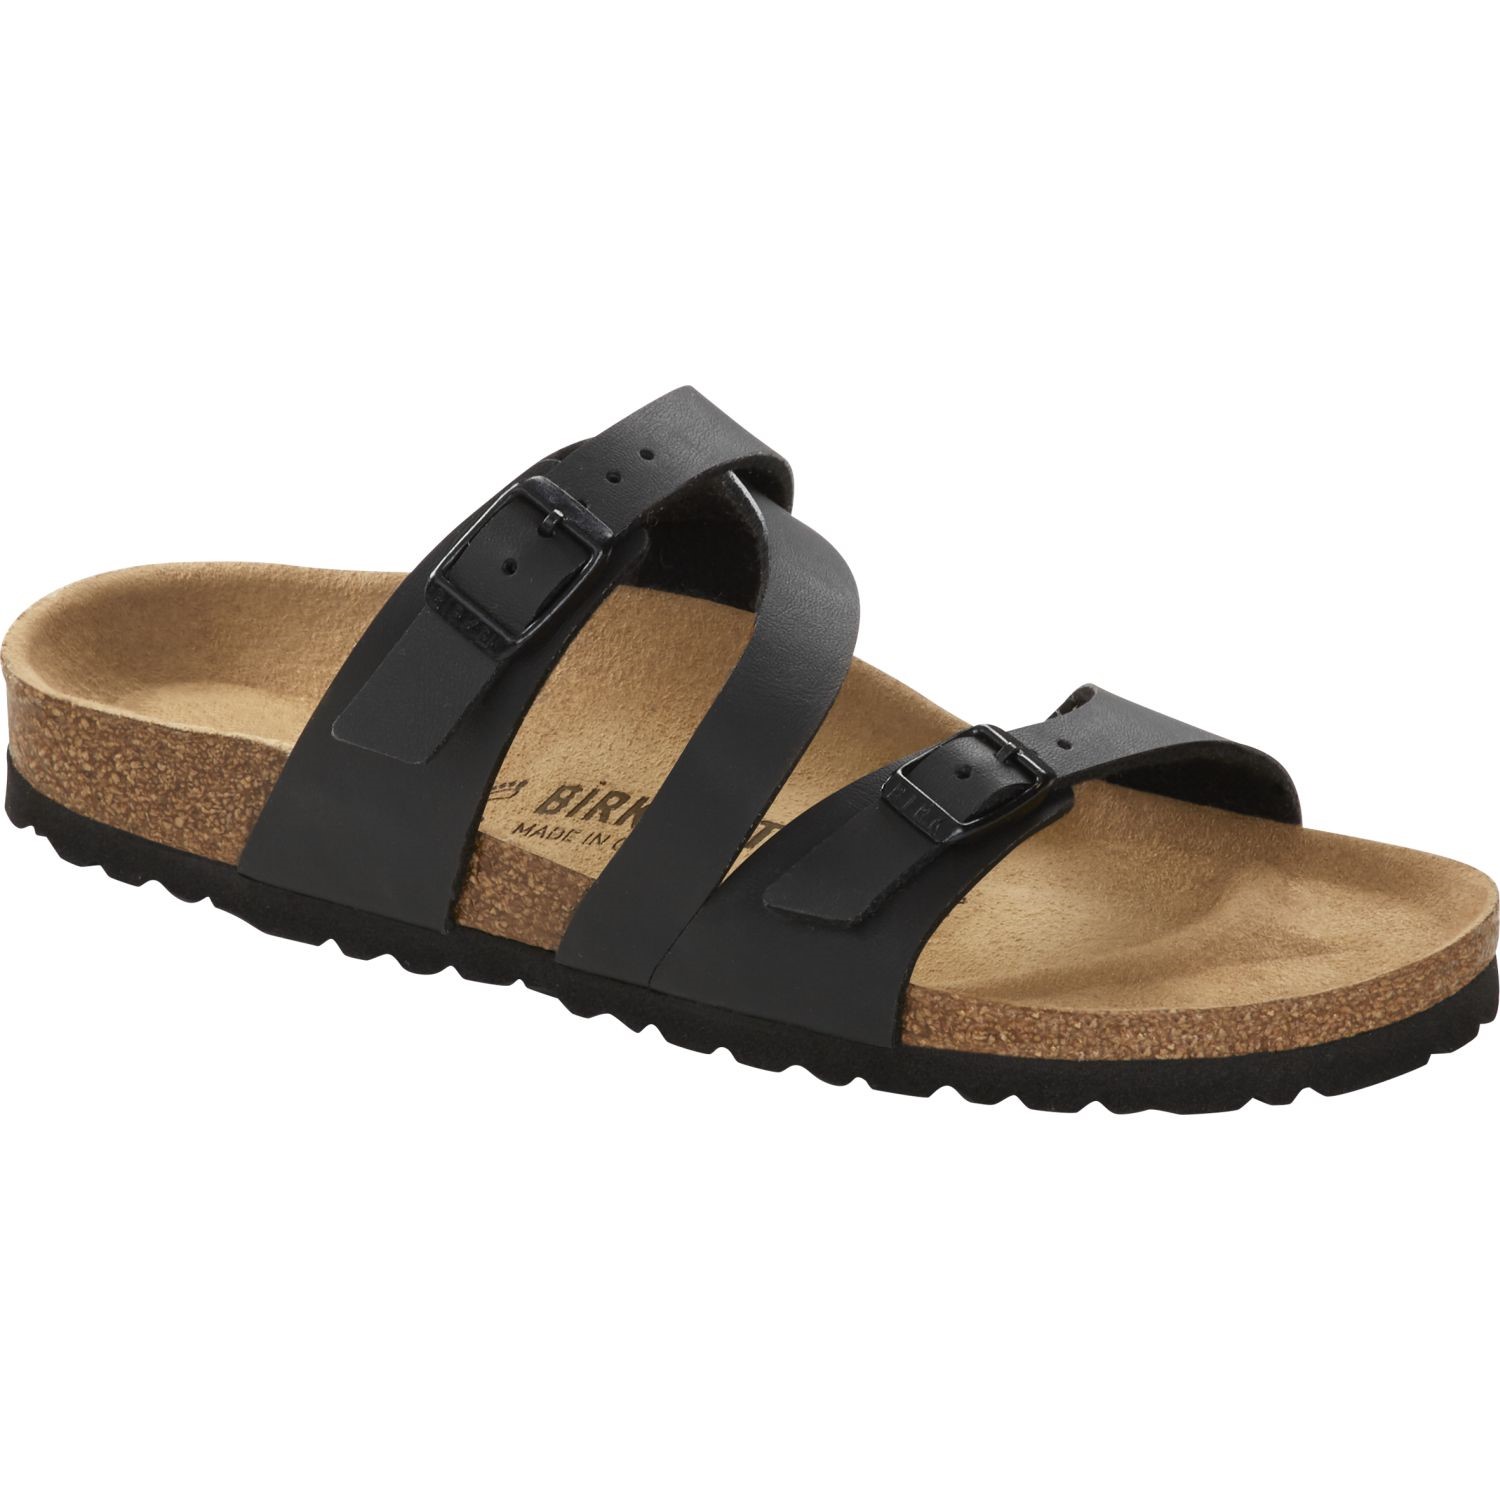 Birkenstock Salina - Slippers - Everyday shoes - Shoes - Timarco.eu